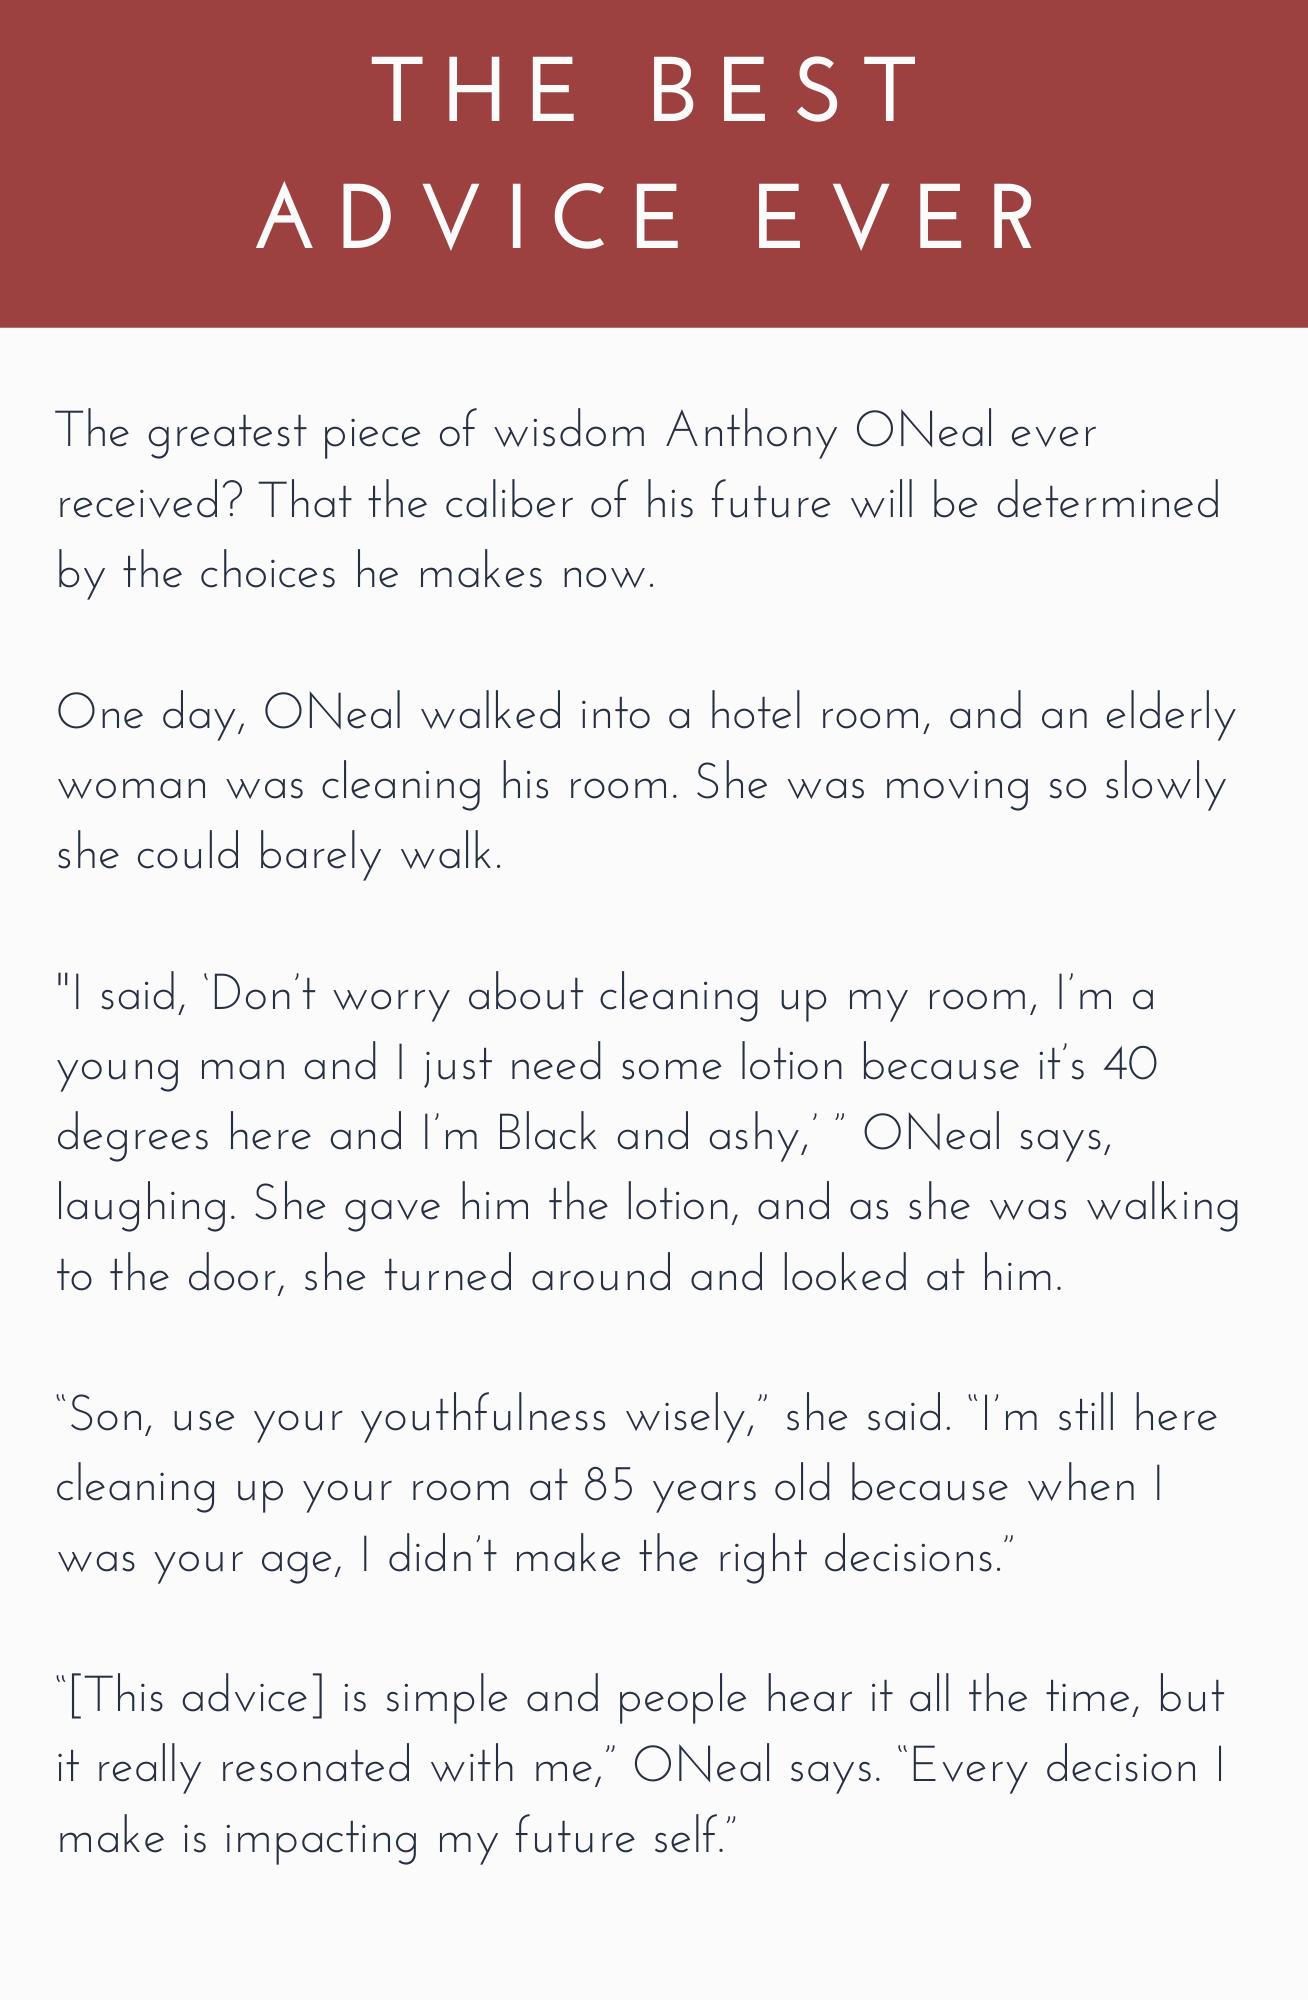 The best advice ever: The greatest piece of wisdom Anthony ONeal ever received? That the caliber of his future will be determined by the choices he makes now.

One day, ONeal walked into a hotel room, and an elderly woman was cleaning his room. She was moving so slowly she could barely walk.

“I said, ‘Don’t worry about cleaning up my room, I’m a young man and I just need some lotion because it’s 40 degrees here and I’m Black and ashy,’ ” ONeal says, laughing. She gave him the lotion, and as she was walking to the door, she turned around and looked at him. 

“Son, use your youthfulness wisely,” she said. “I’m still here cleaning up your room at 85 years old because when I was your age, I didn’t make the right decisions.” 

“[This advice] is simple and people hear it all the time, but it really resonated with me,” ONeal says. “Every decision I make is impacting my future self.”